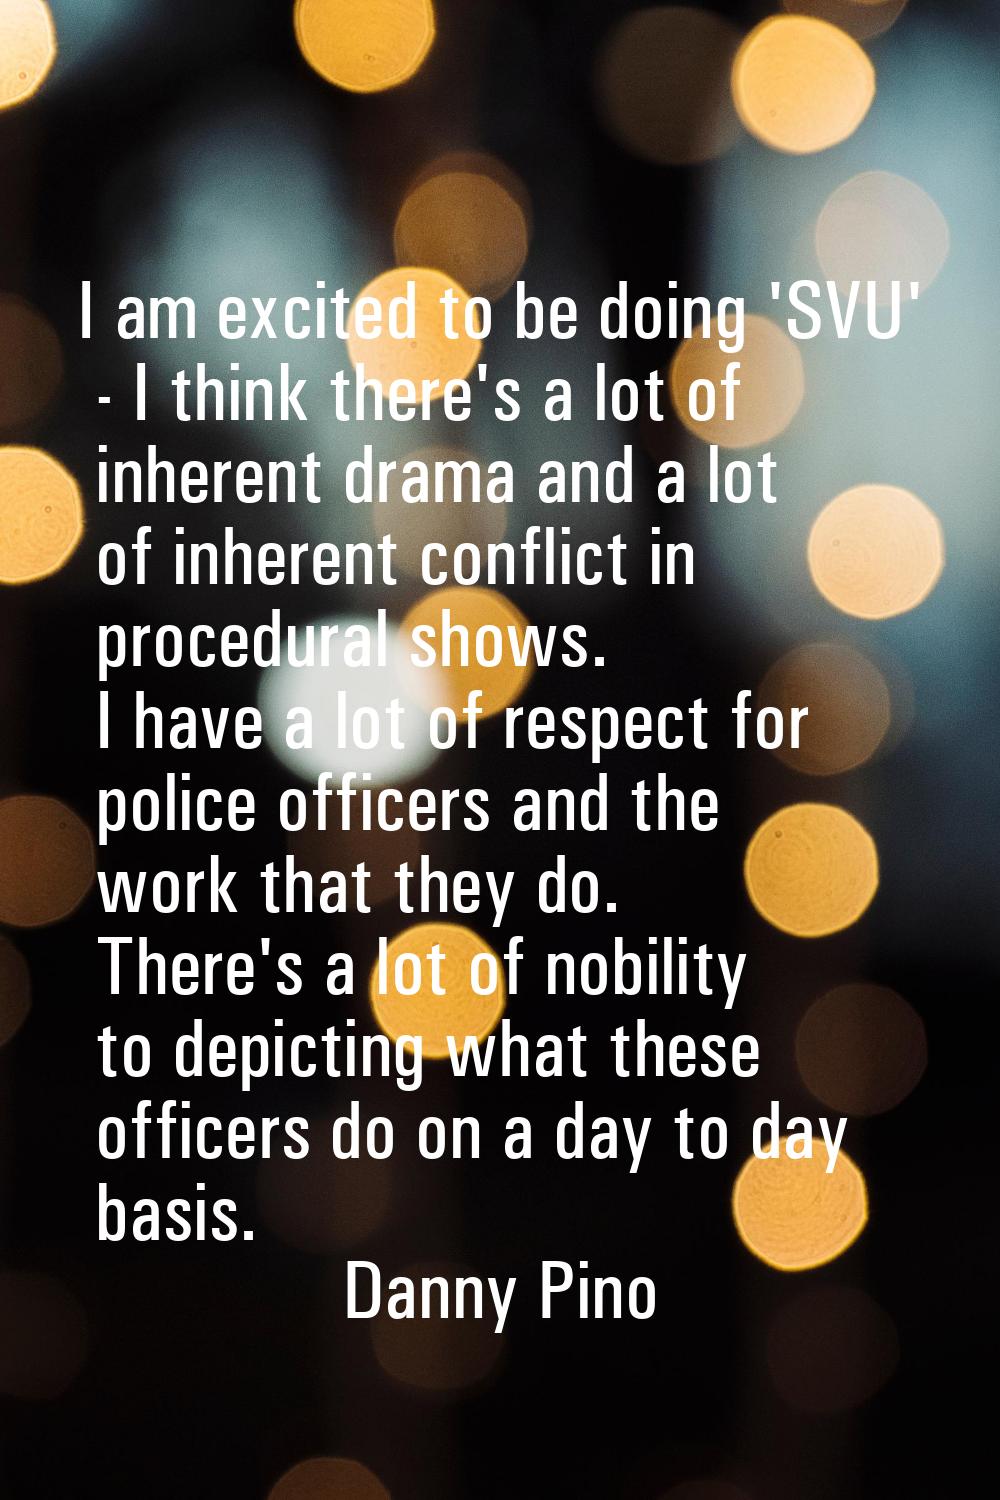 I am excited to be doing 'SVU' - I think there's a lot of inherent drama and a lot of inherent conf